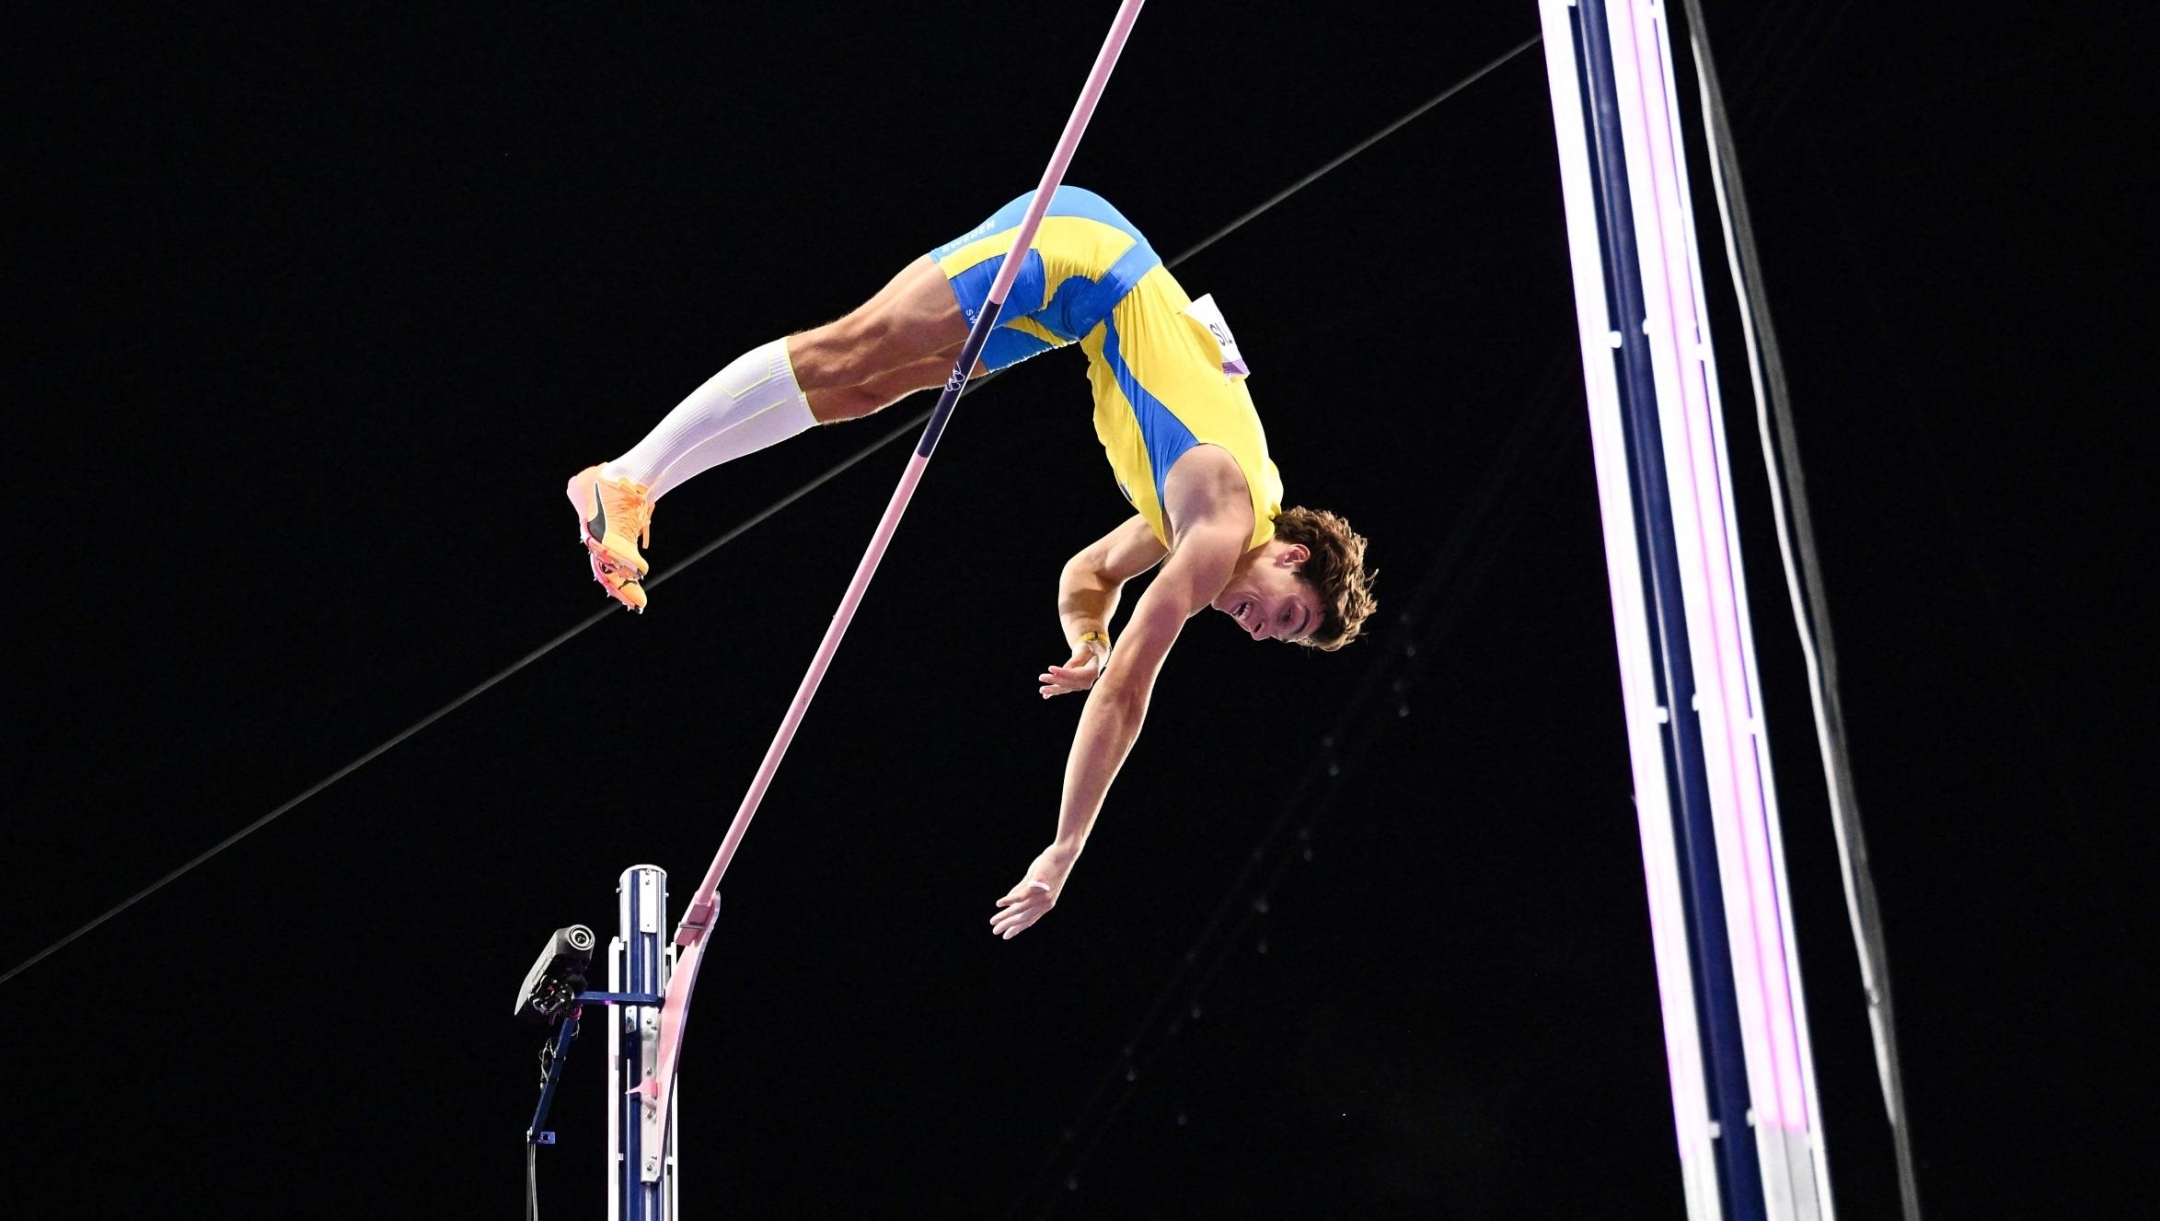 Sweden's Armand Duplantis passes 6.25m and sets the new world record in the men's pole vault final of the athletics event at the Paris 2024 Olympic Games at Stade de France in Saint-Denis, north of Paris, on August 5, 2024. (Photo by Kirill KUDRYAVTSEV / AFP)